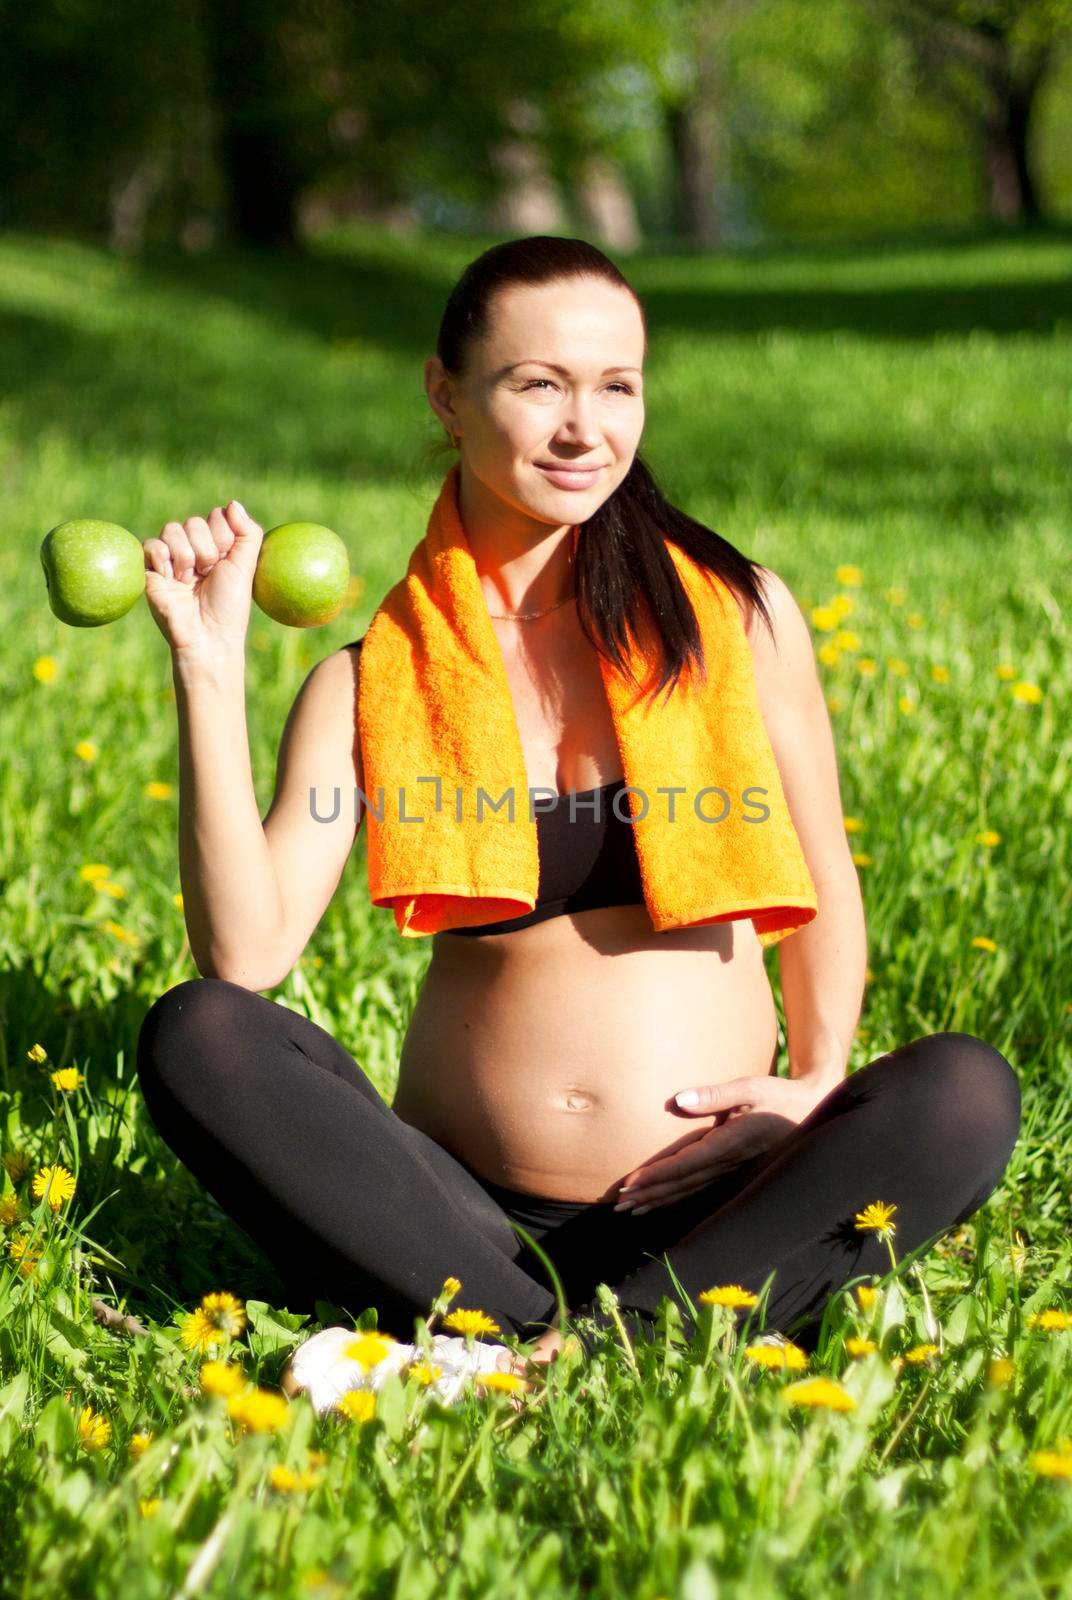 Pregnant woman with dumbbells and towel doing sports in the park.